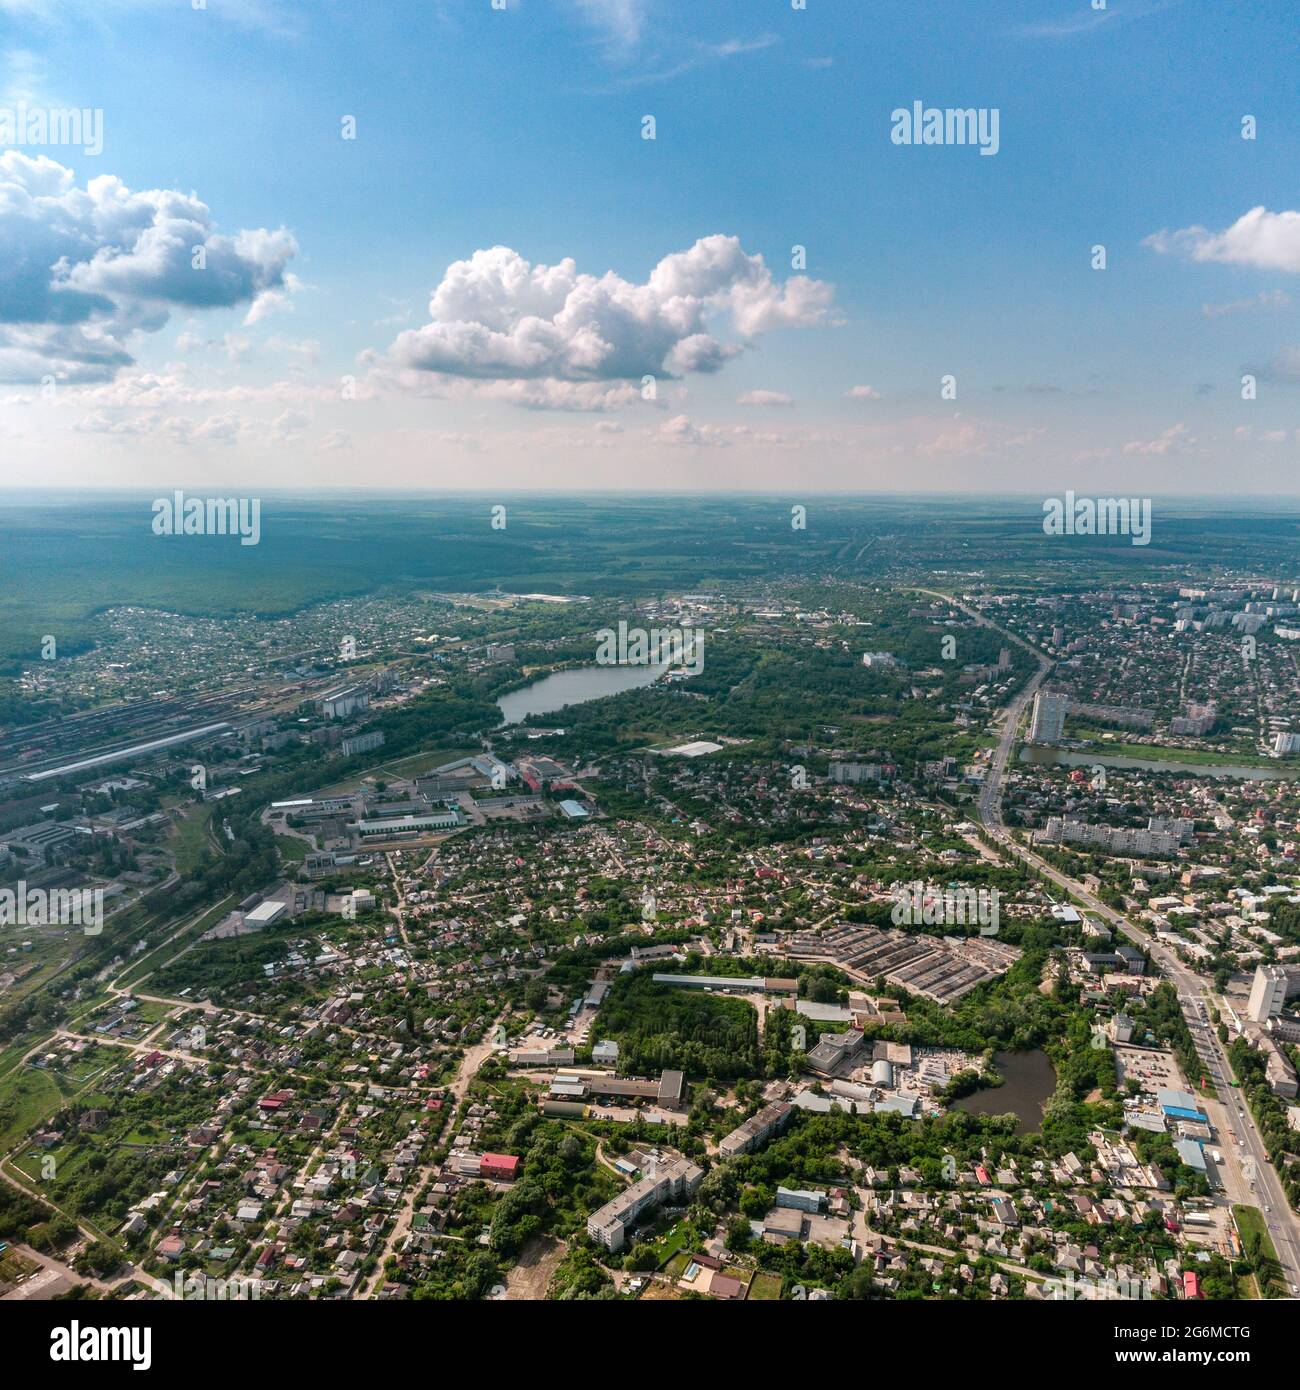 Aerial high view Kharkiv city Shevchenkivskyi district with Udy river, urban and residential multistory buildings with scenic colorful cloudy sky in s Stock Photo